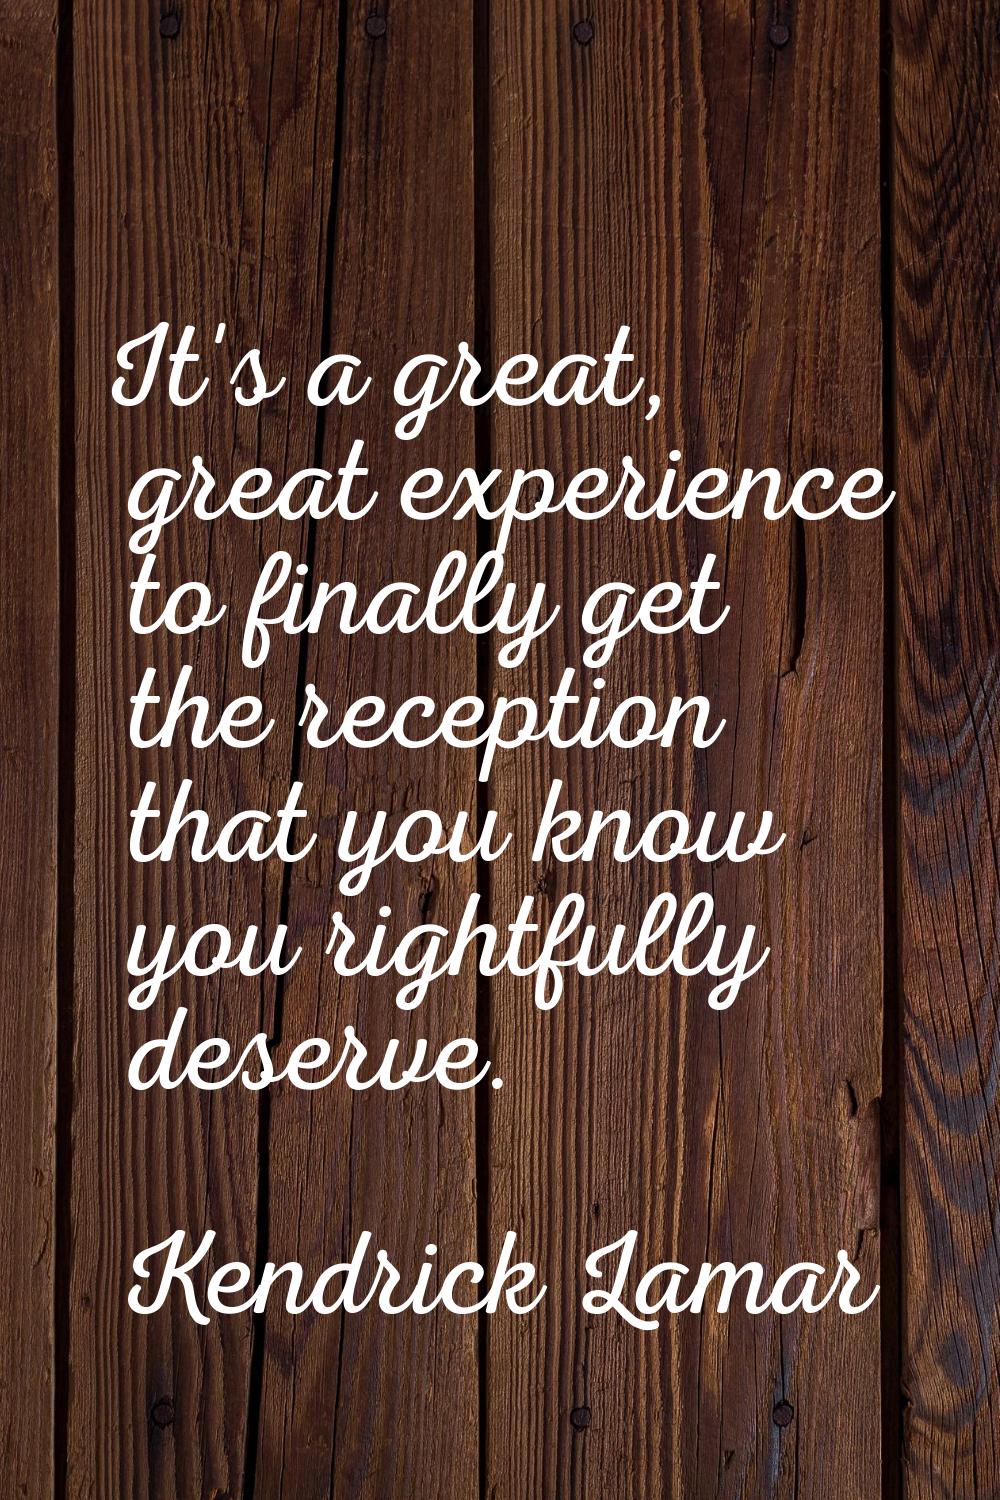 It's a great, great experience to finally get the reception that you know you rightfully deserve.